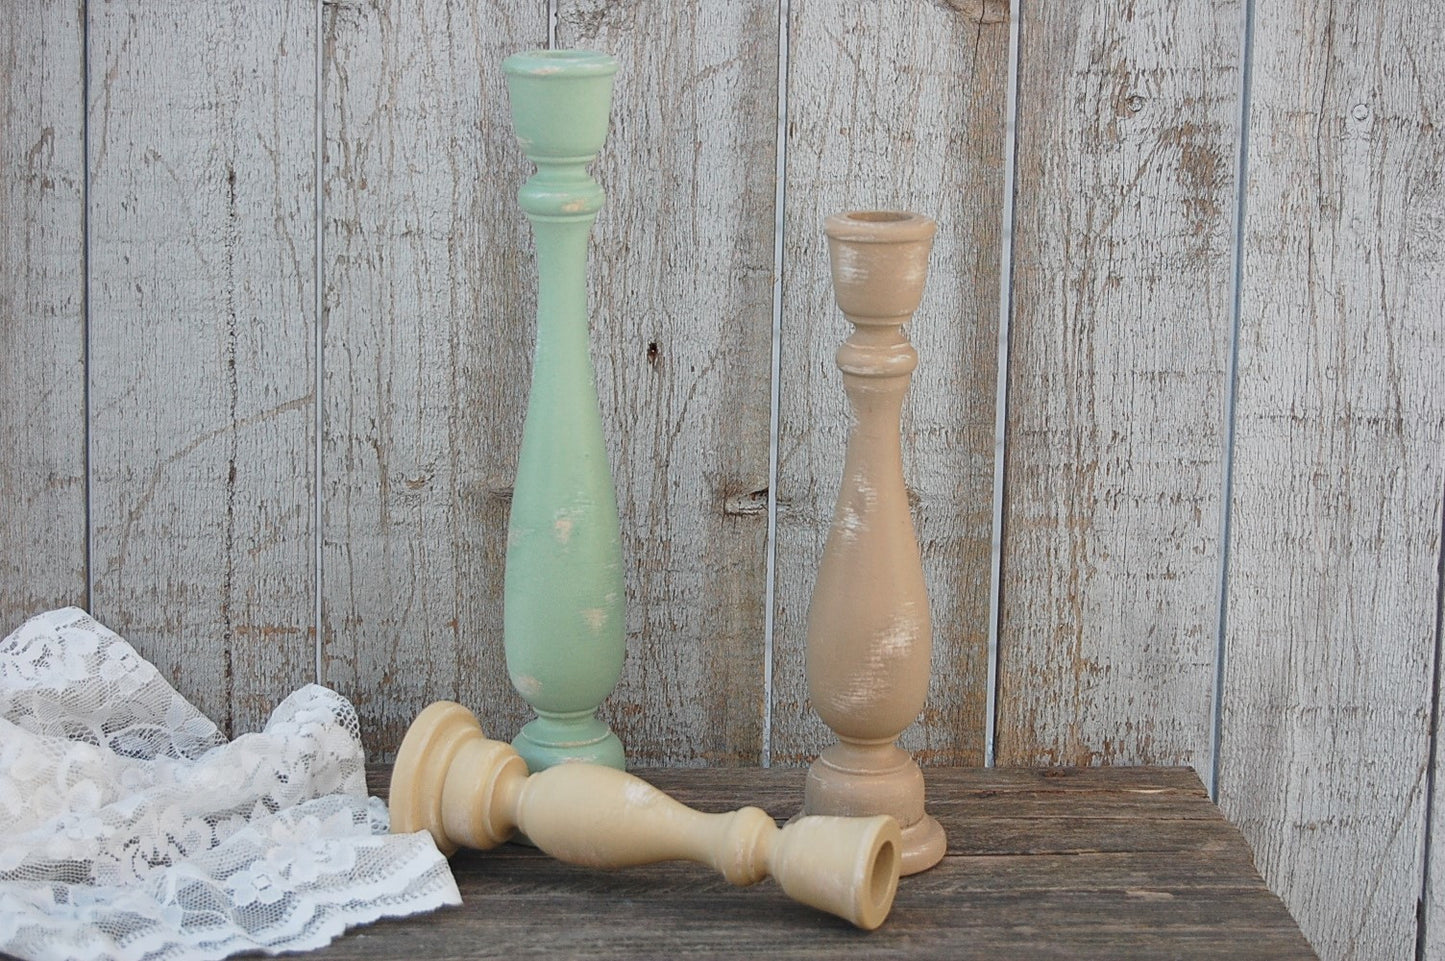 Earth tone candlesticks - The Vintage Artistry